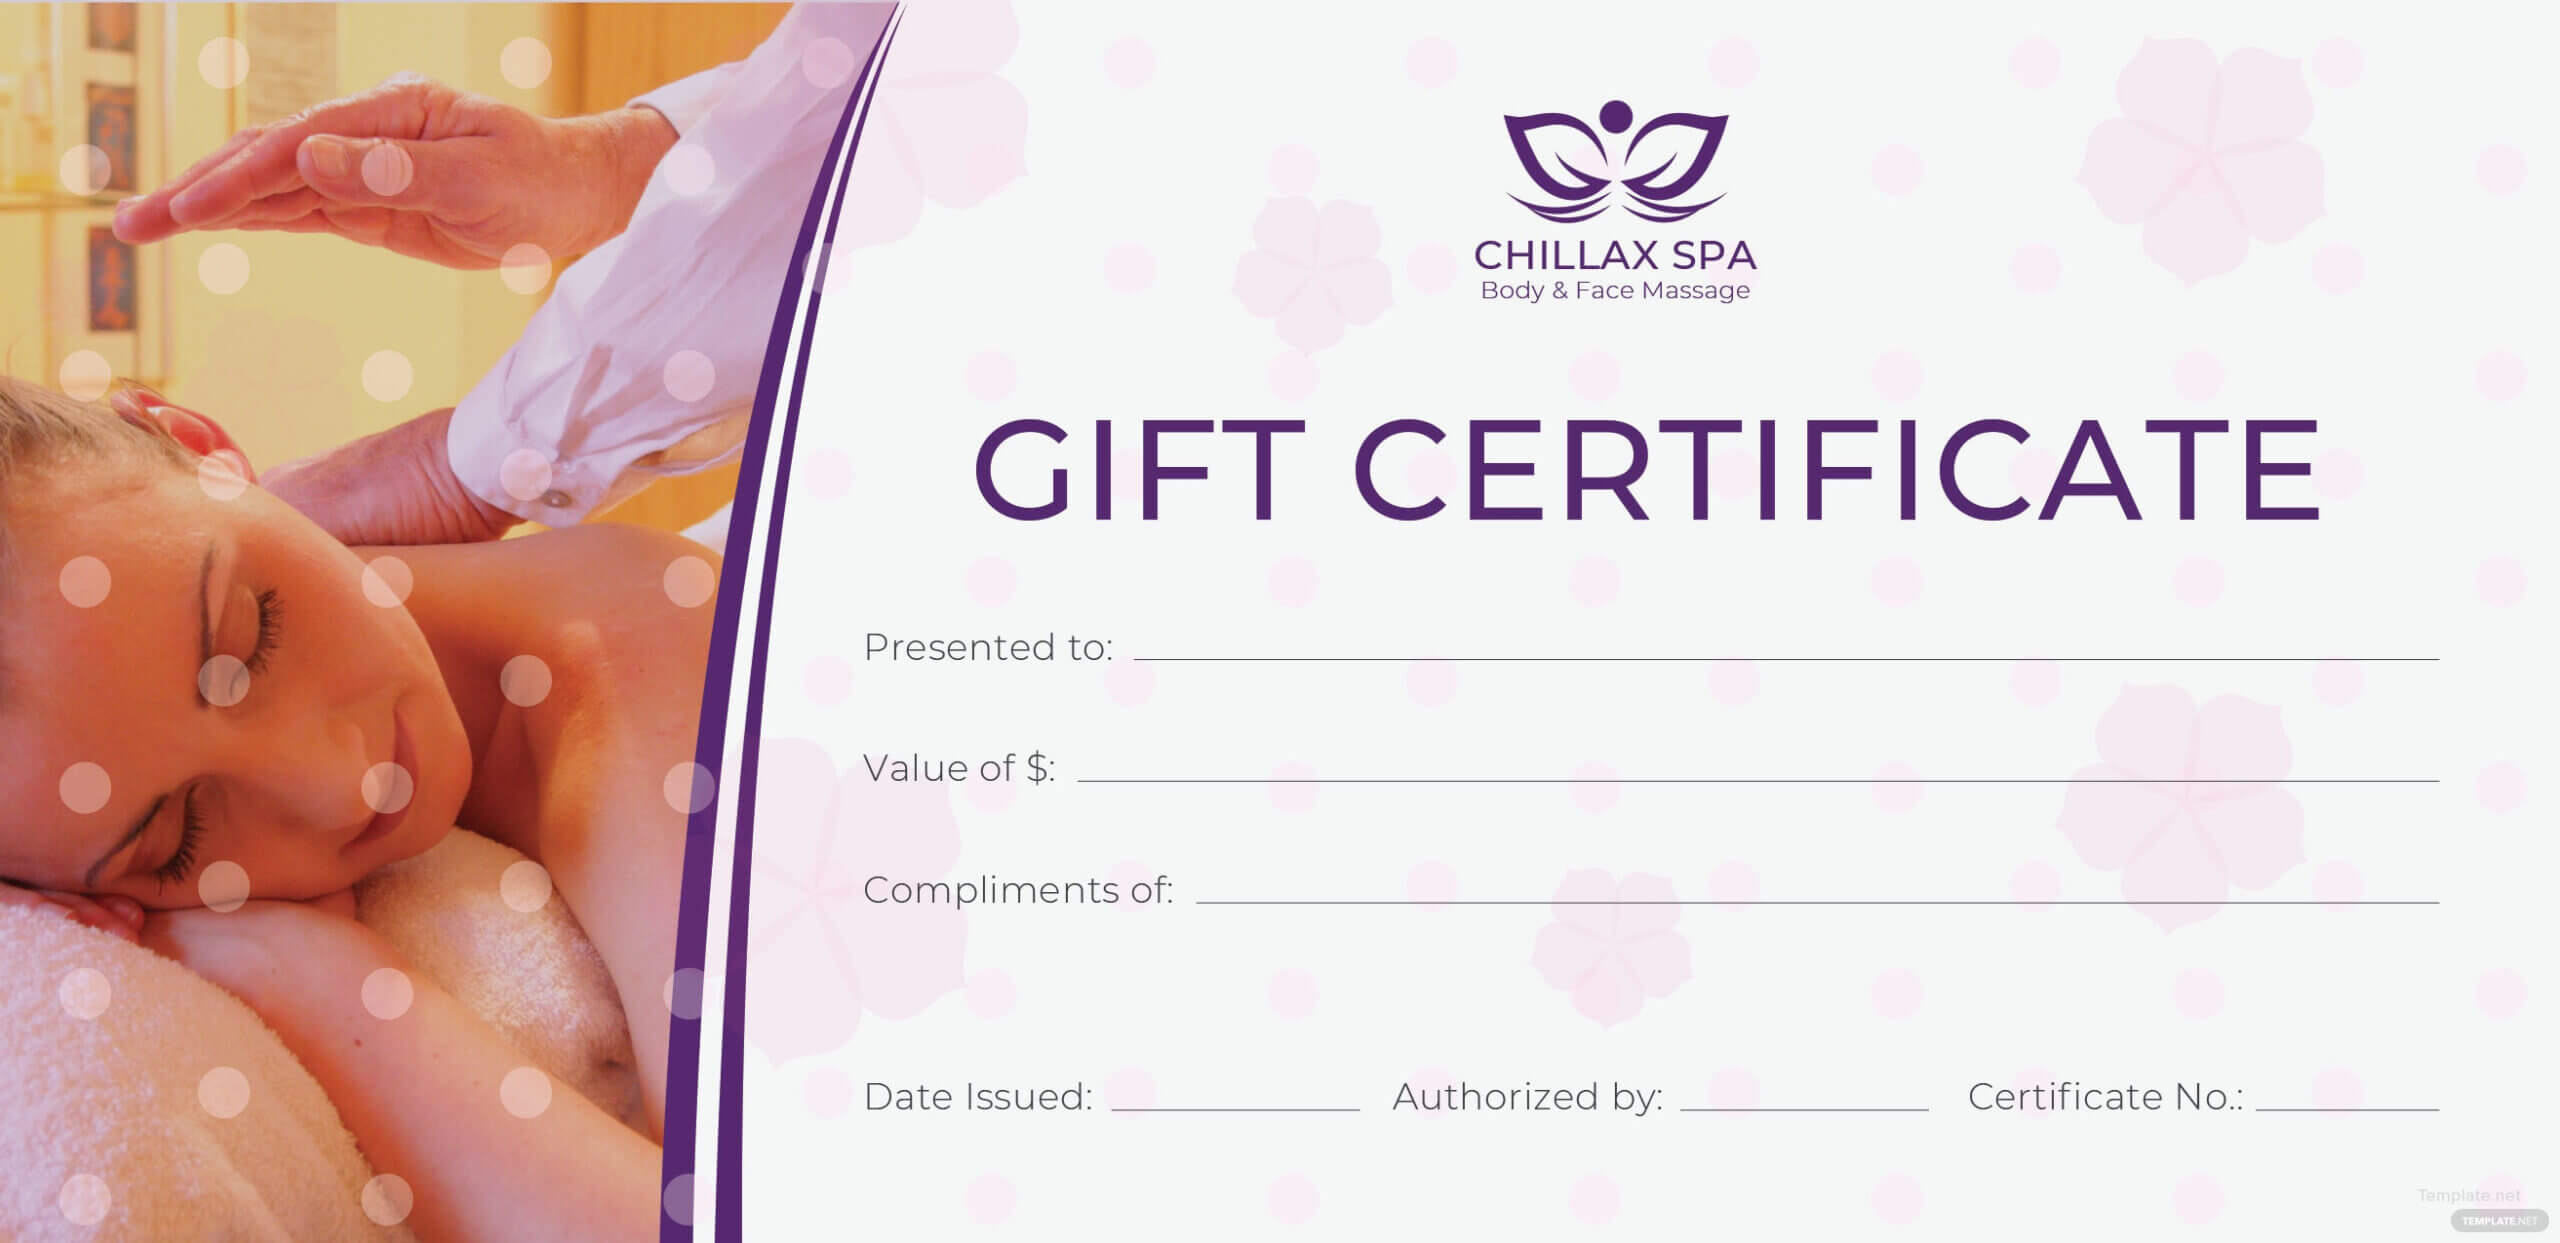 Massage Gift Certificate Template Free Printable Massage With Massage Gift Certificate Template Free Printable